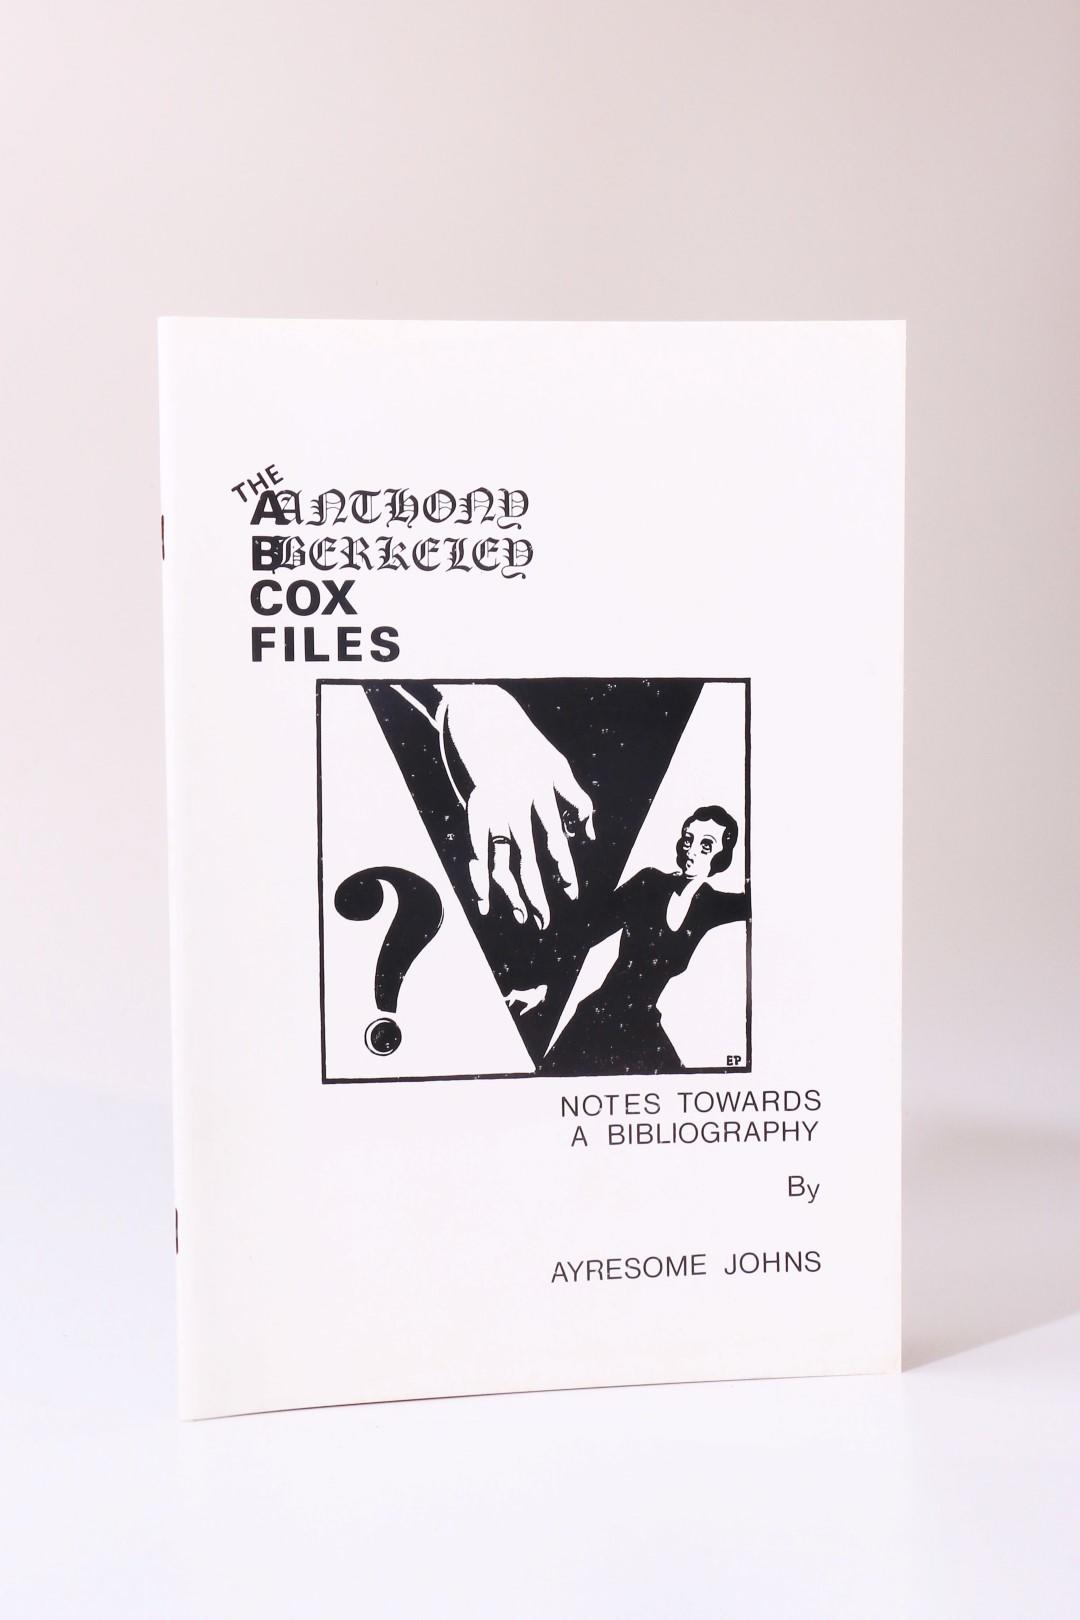 Ayresome Johns [George Locke] - The Anthony Berkeley Cox Files: Notes Towards a Bibliography - Ferret Fantasy, 1993, Limited Edition.